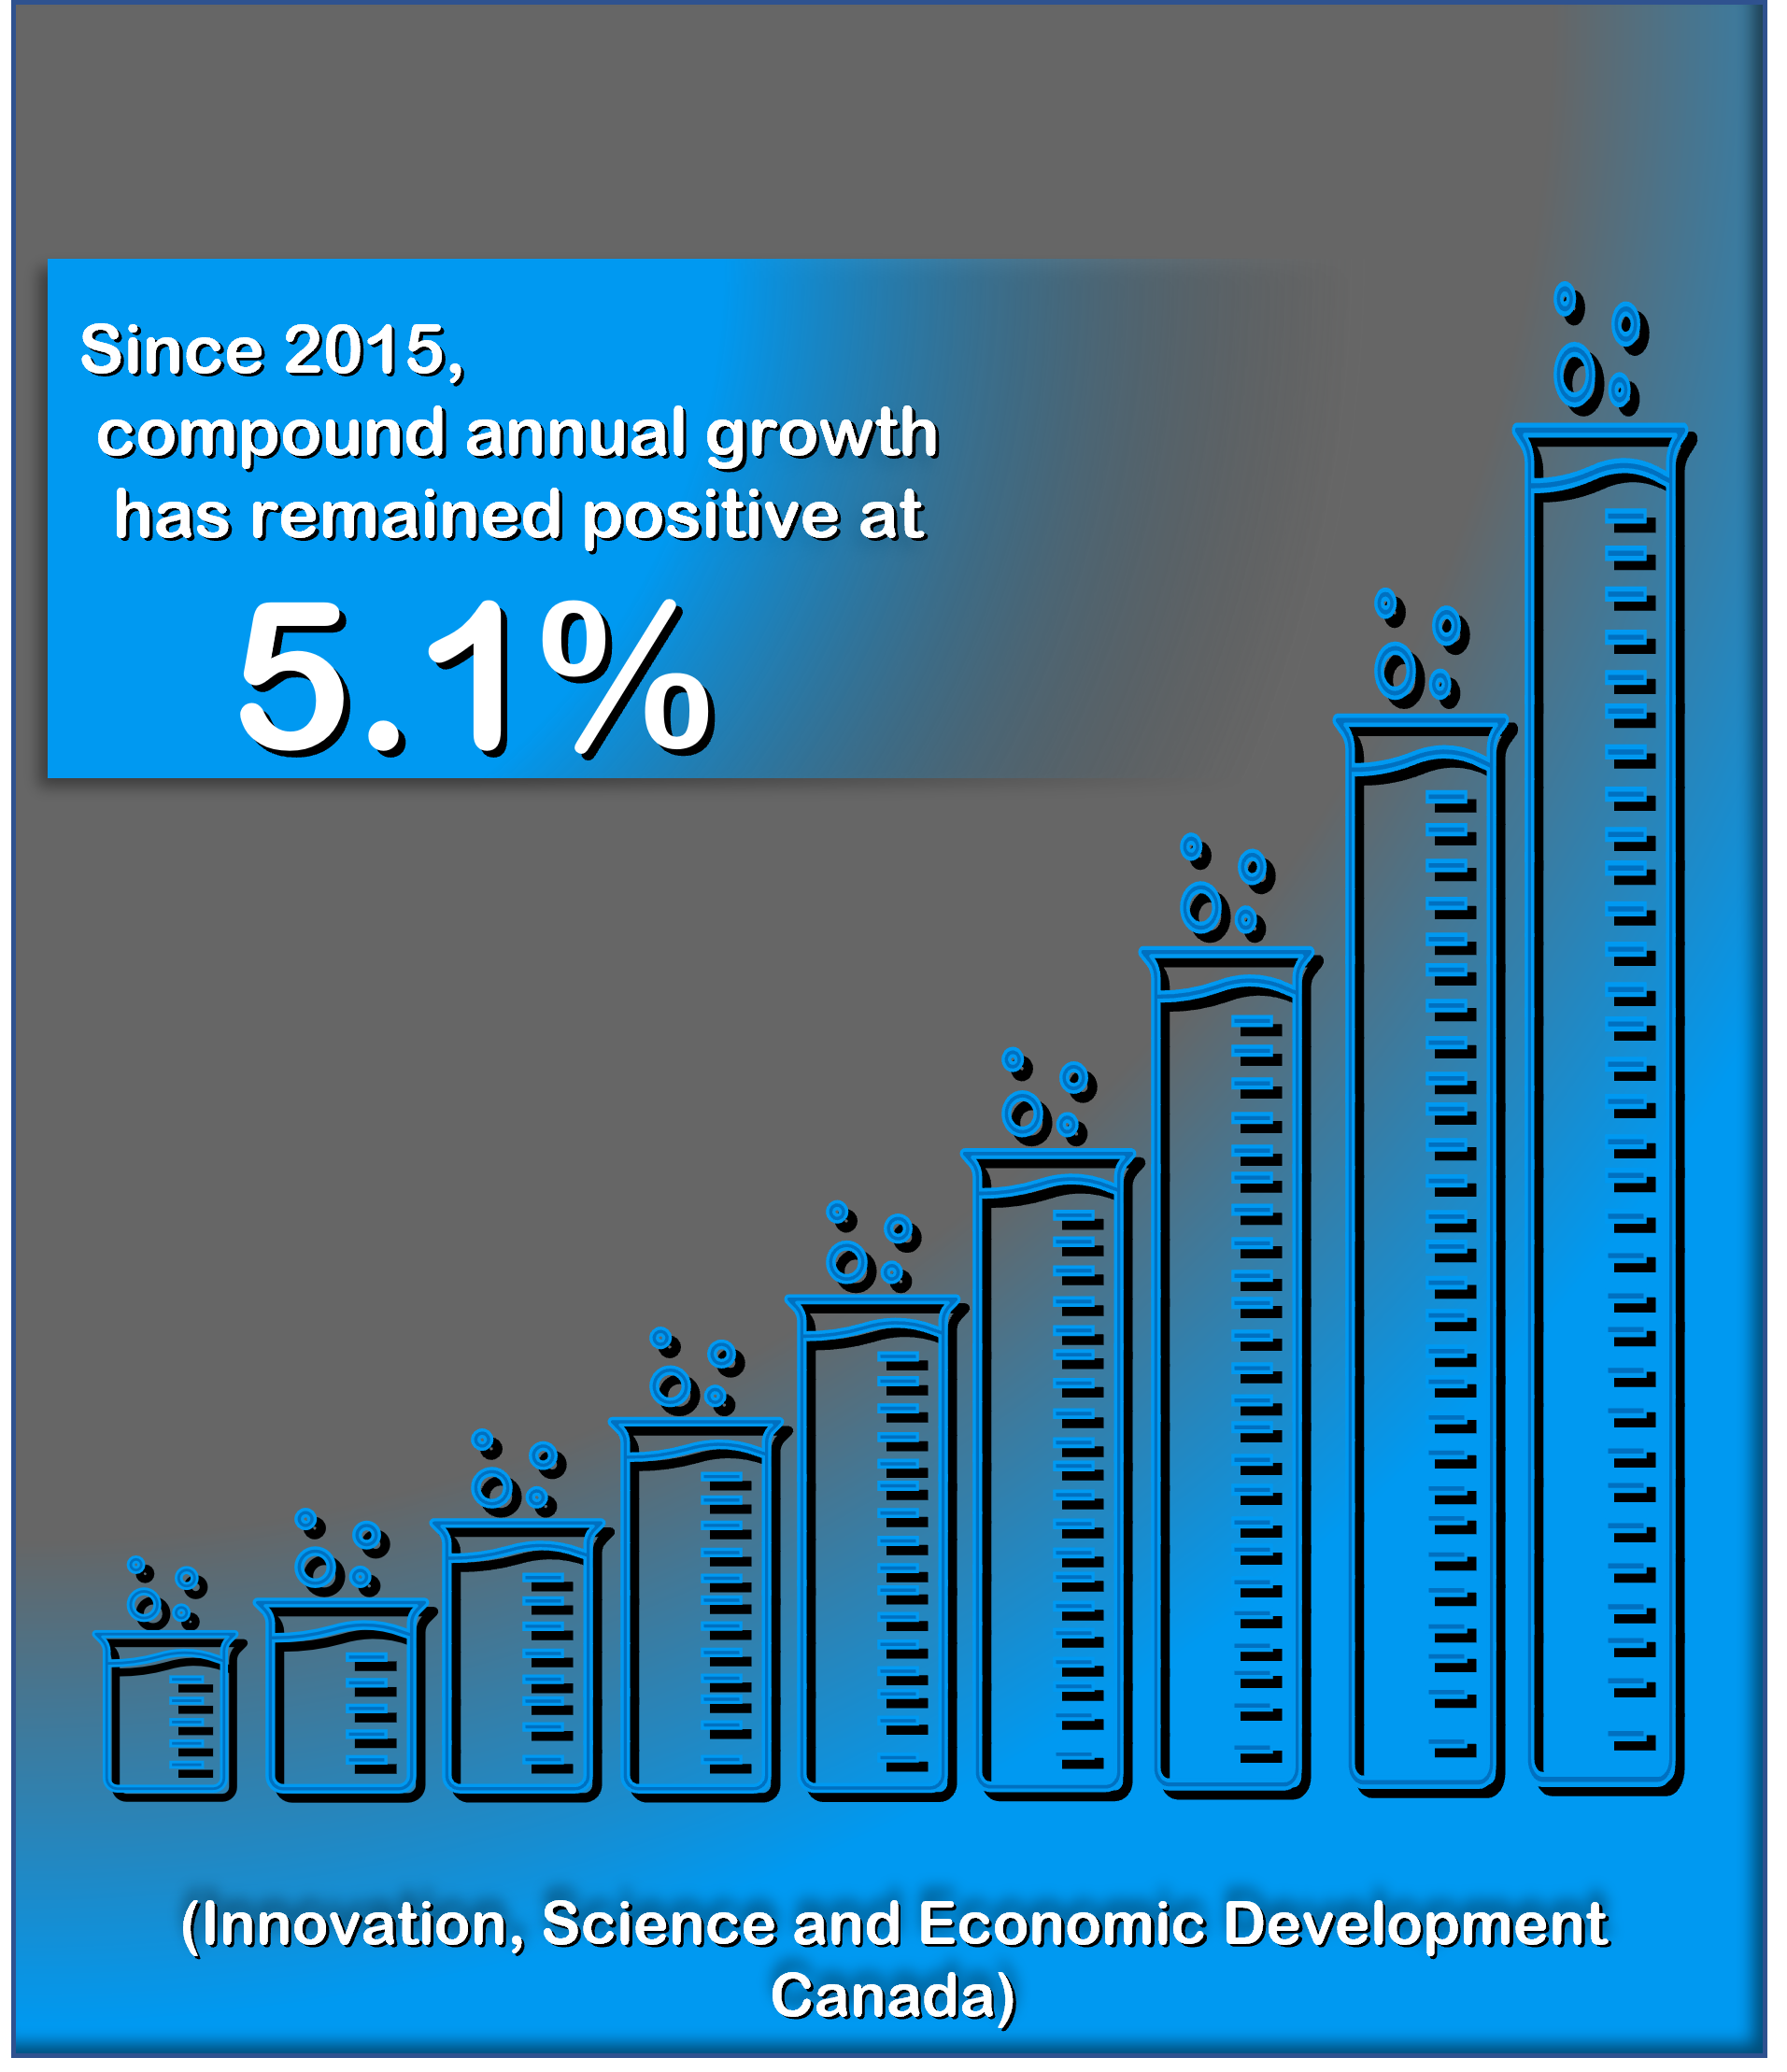 Pharma compound annual growth of 5.1% since 2015 infographic